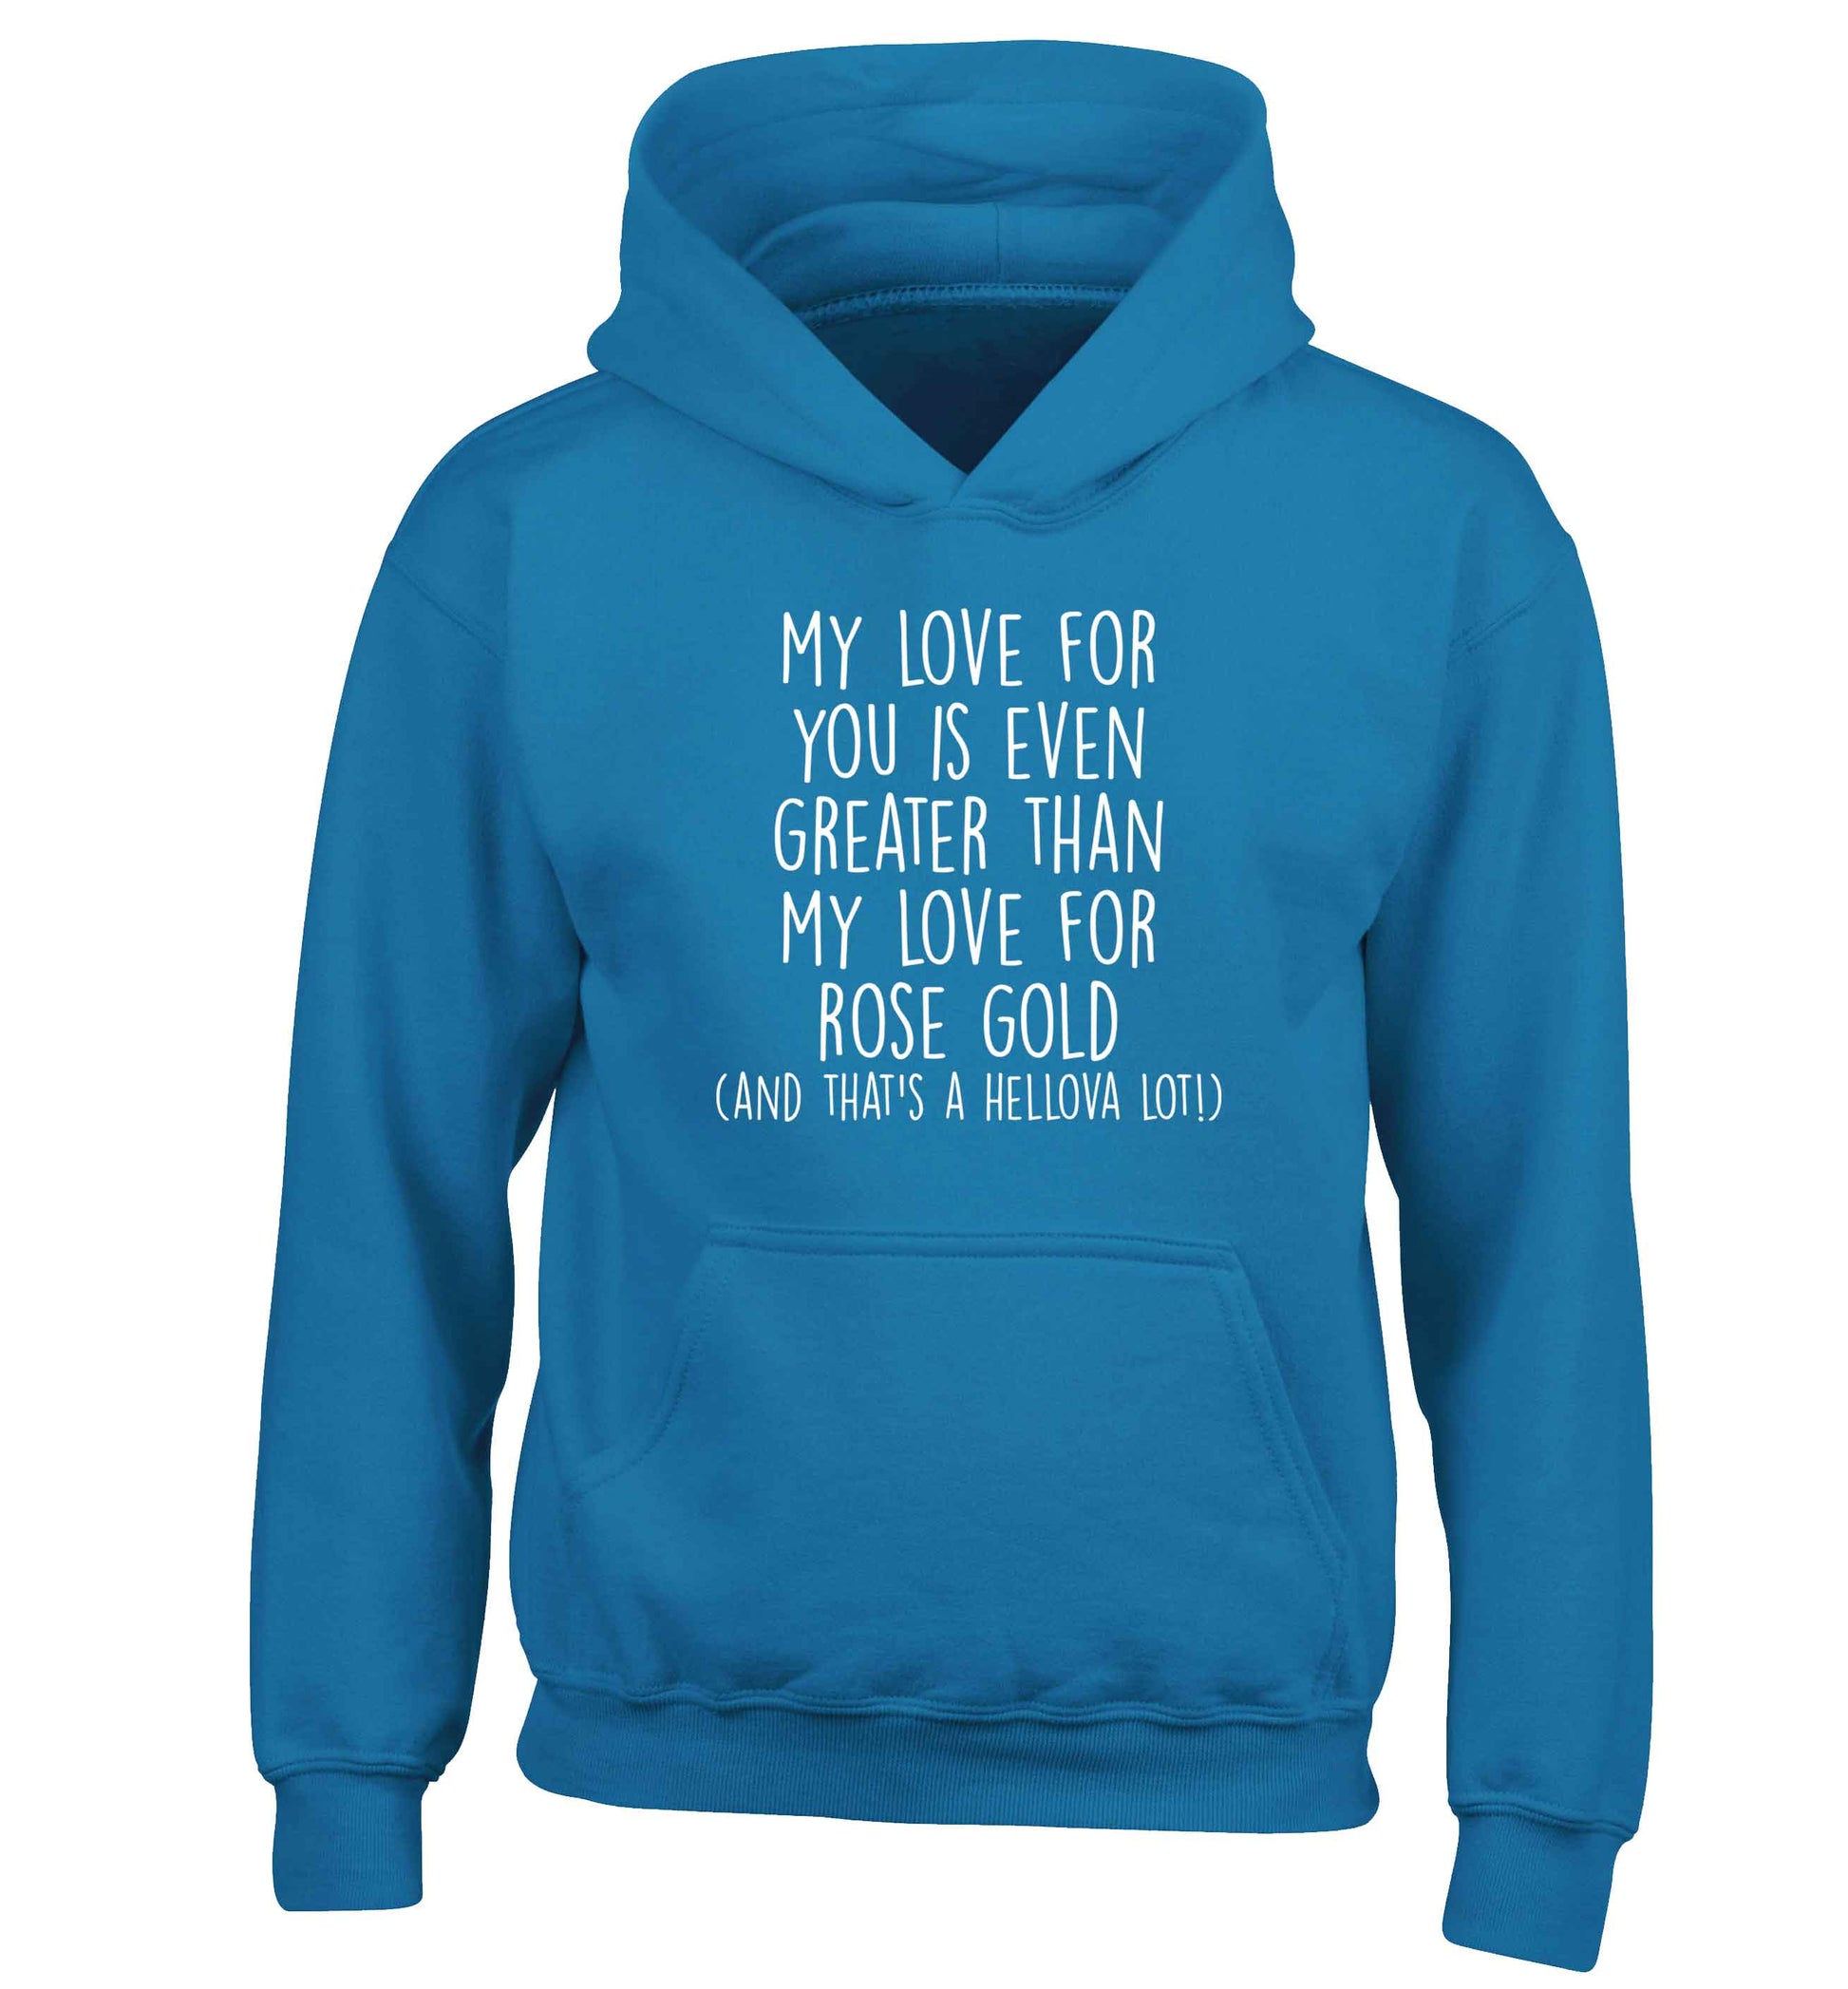 My love for you is even greater than my love for rose gold (and that's a hellova lot) children's blue hoodie 12-13 Years